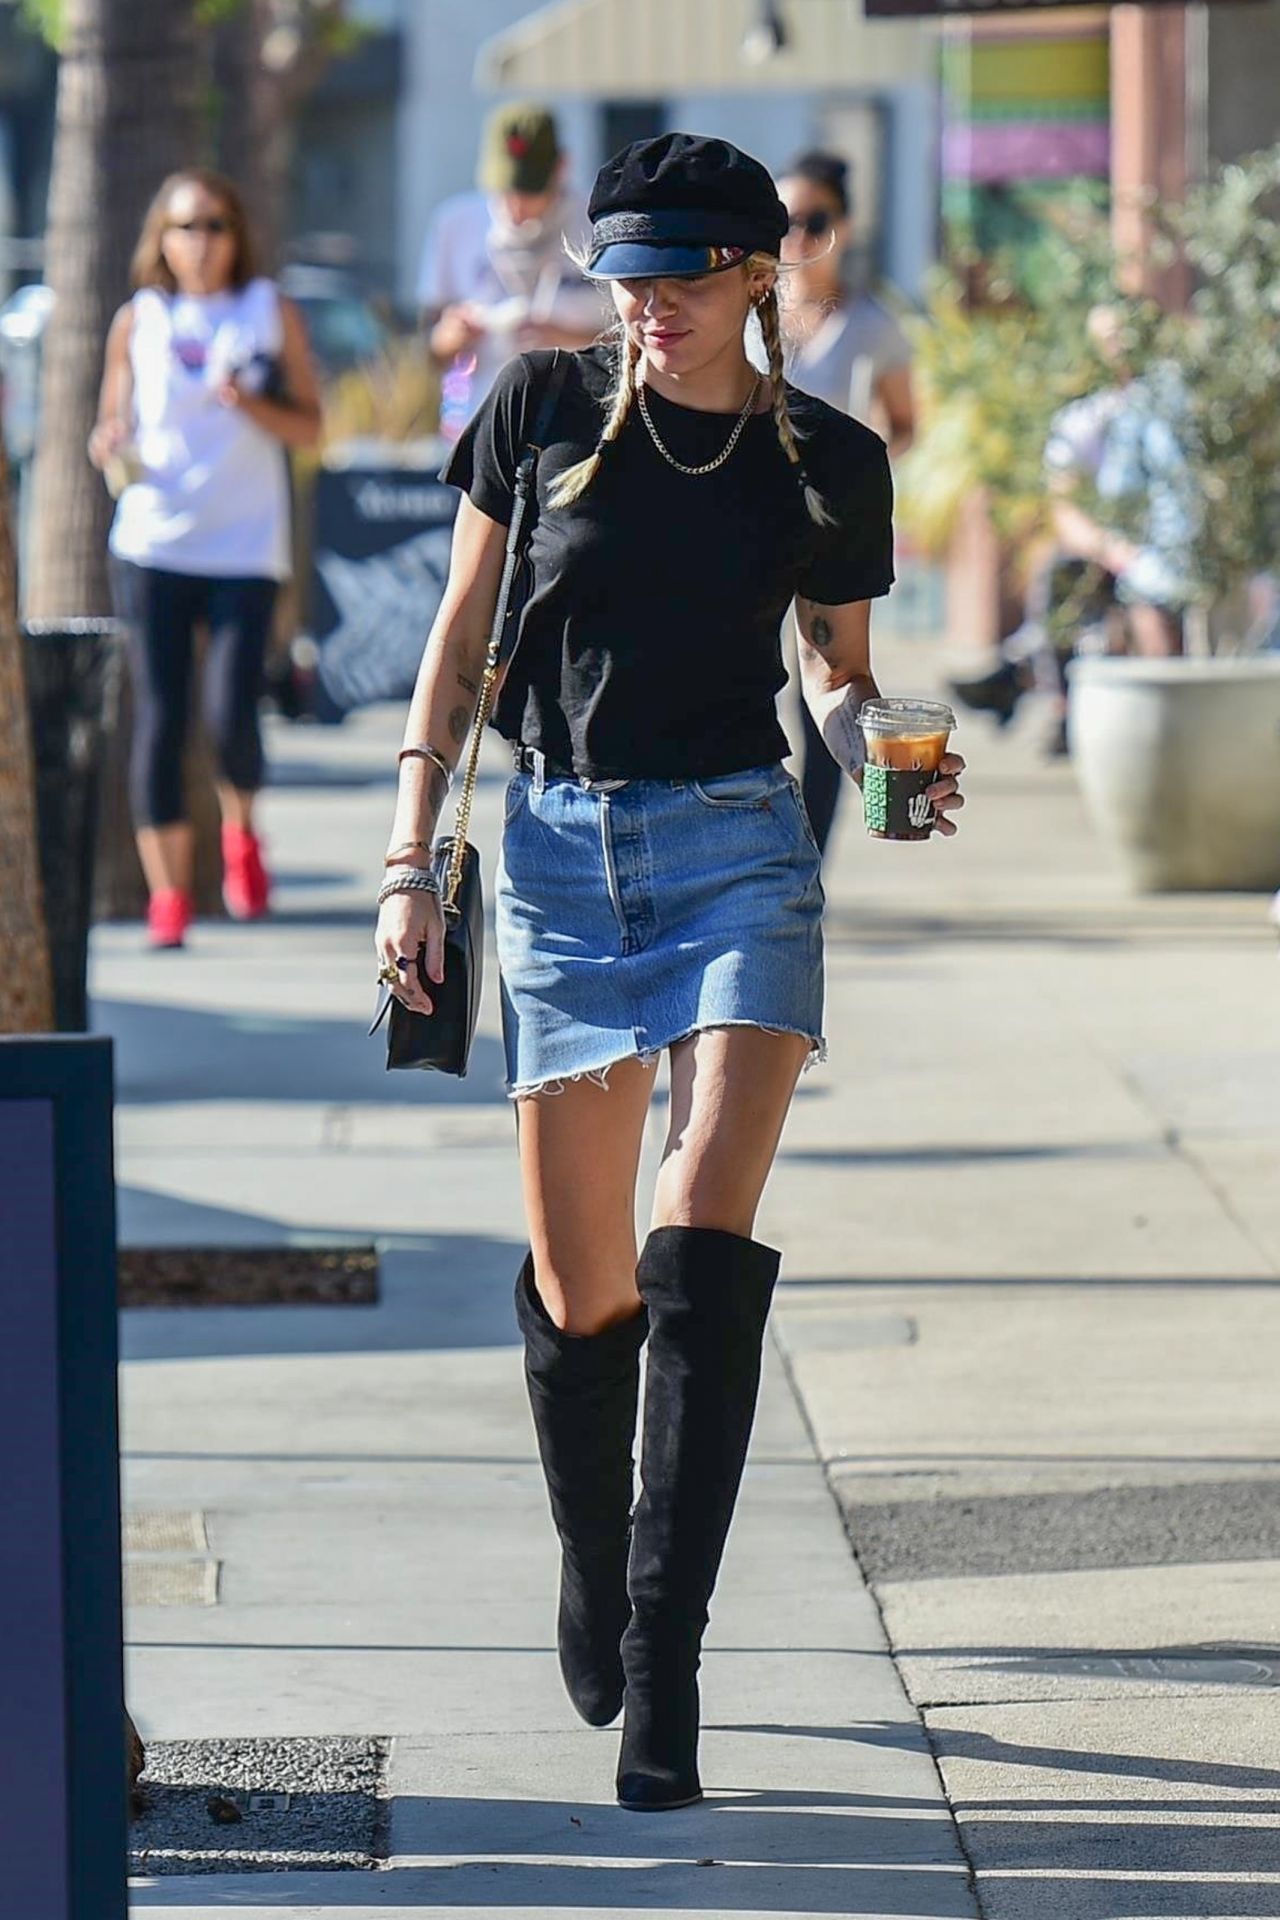 Miley Cyrus In Mini Denim Skirt And Knee High Black Boots 10172019